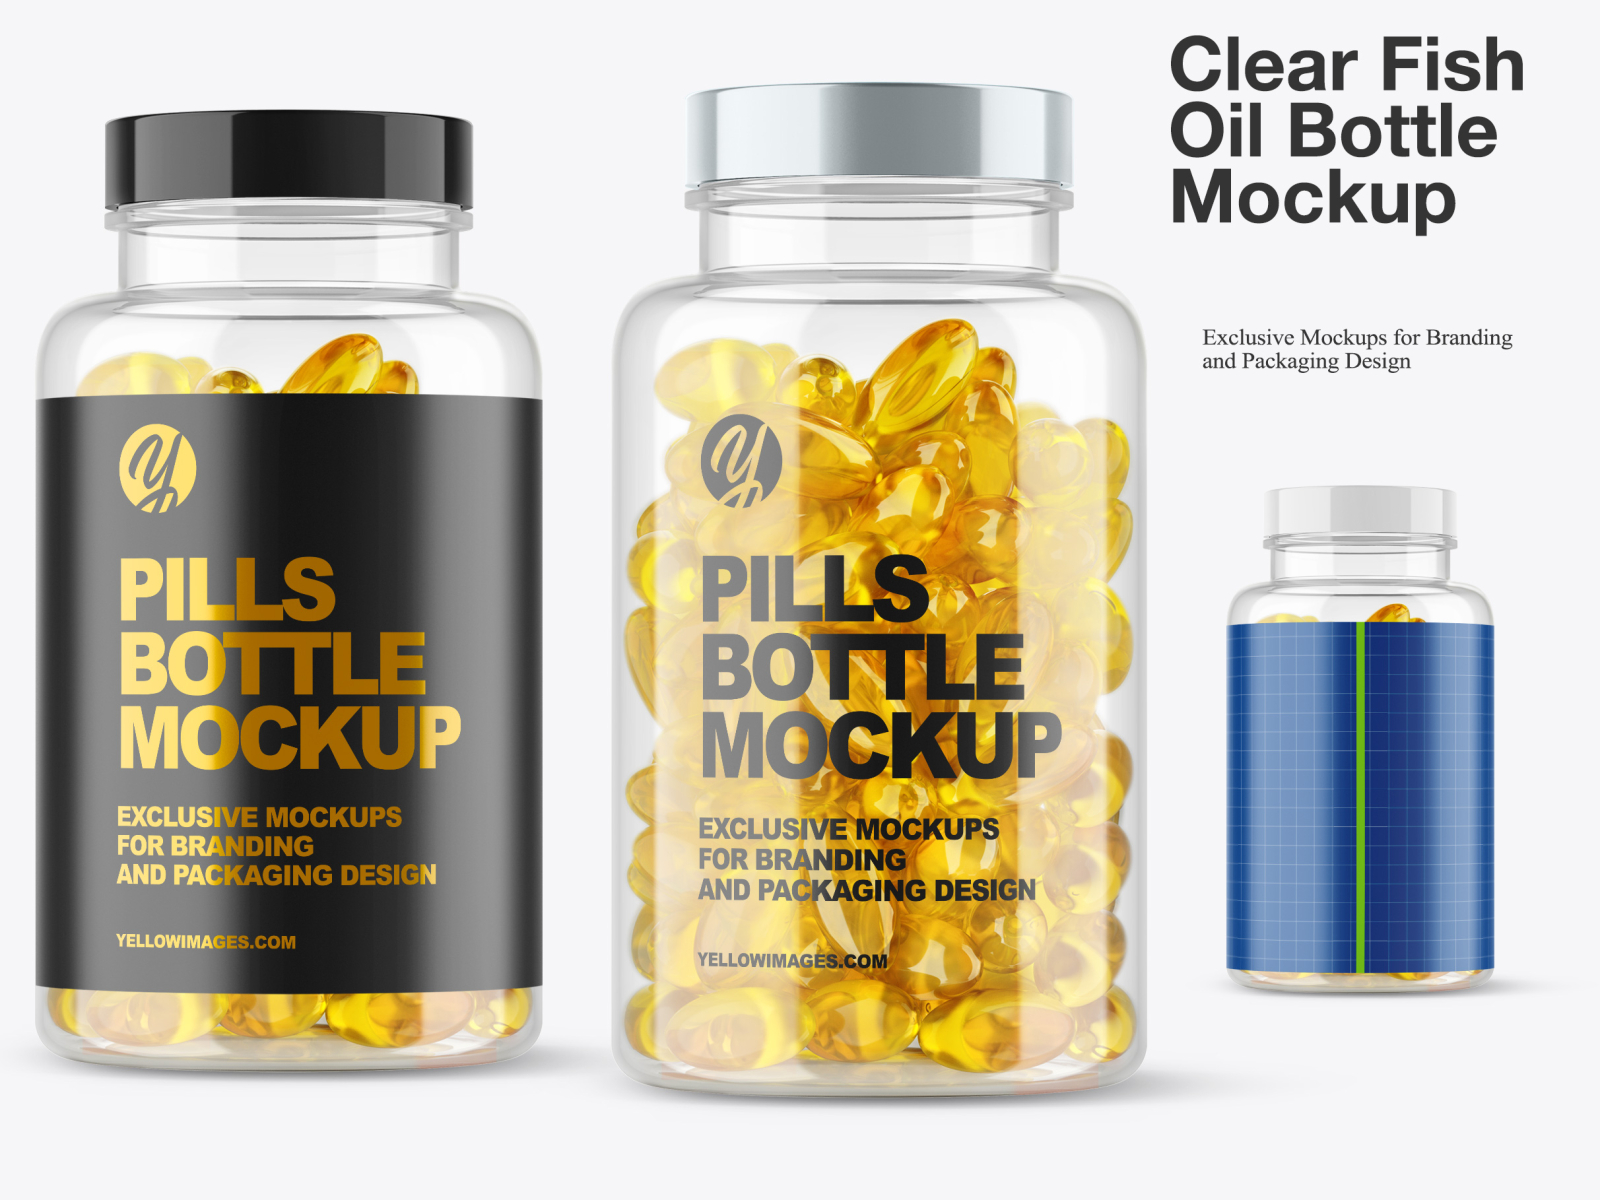 Download Clear Fish Oil Bottle Mockup By Oleksandr Hlubokyi On Dribbble Yellowimages Mockups